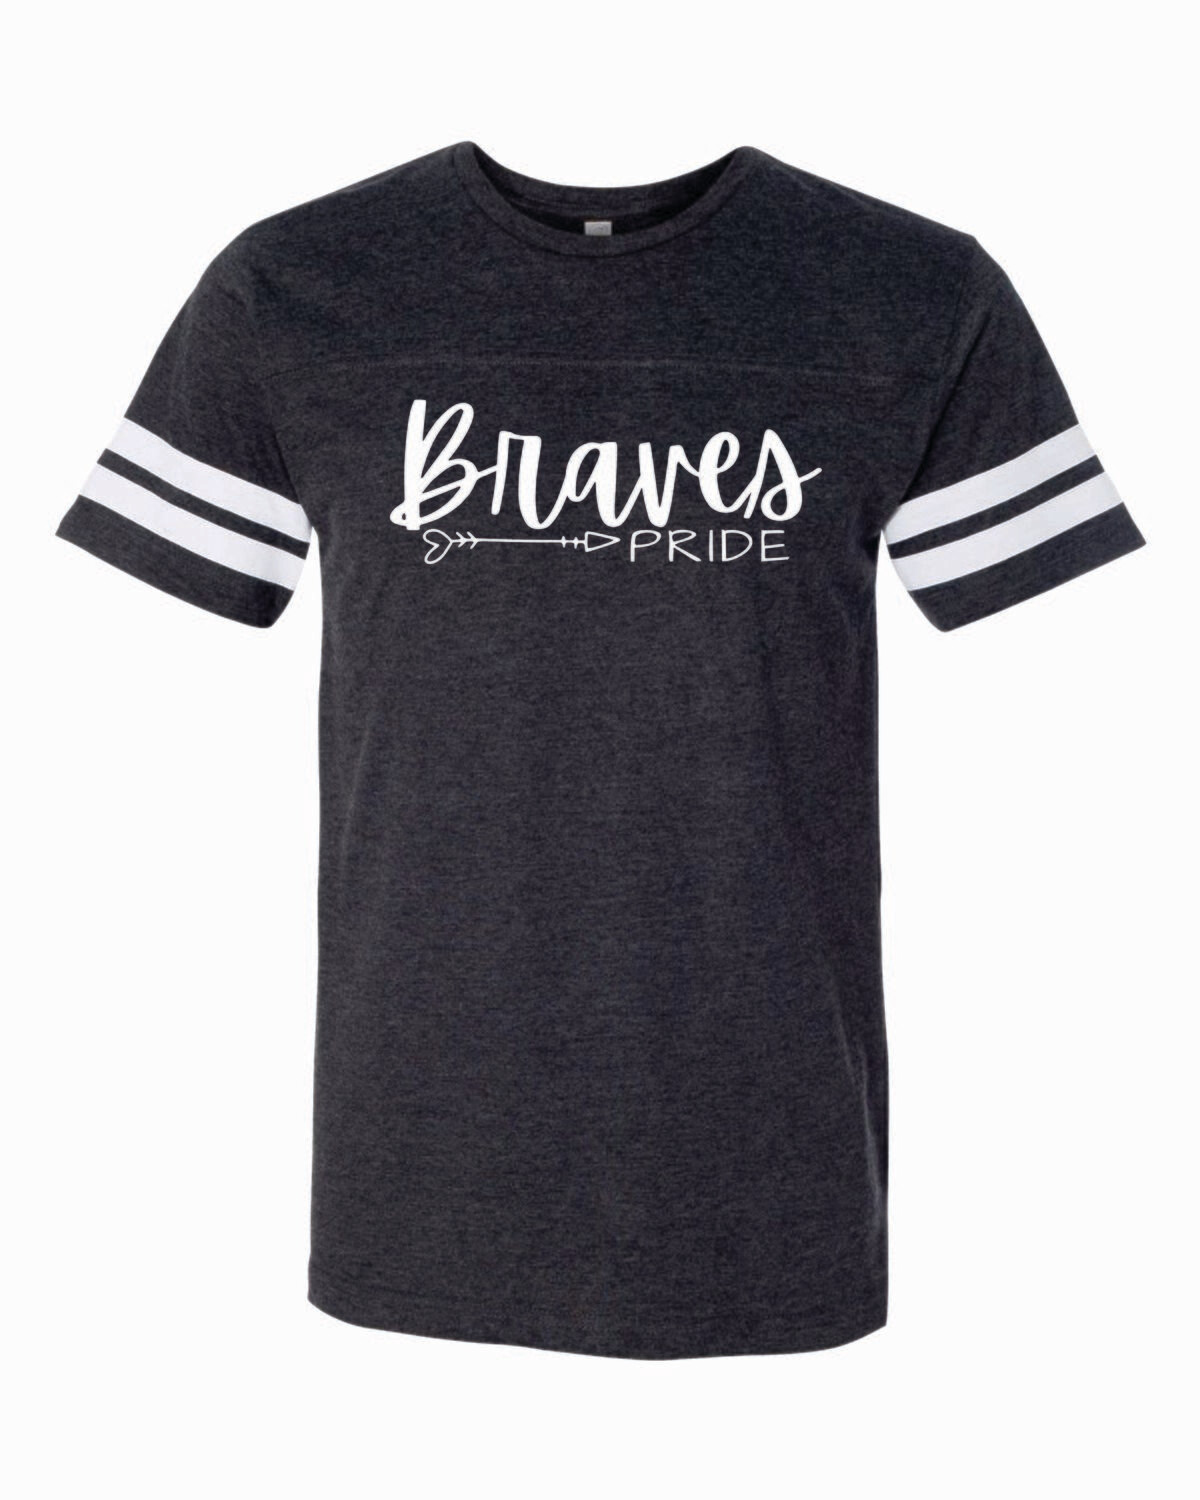 Braves PRIDE Football Tee, 2 colors available